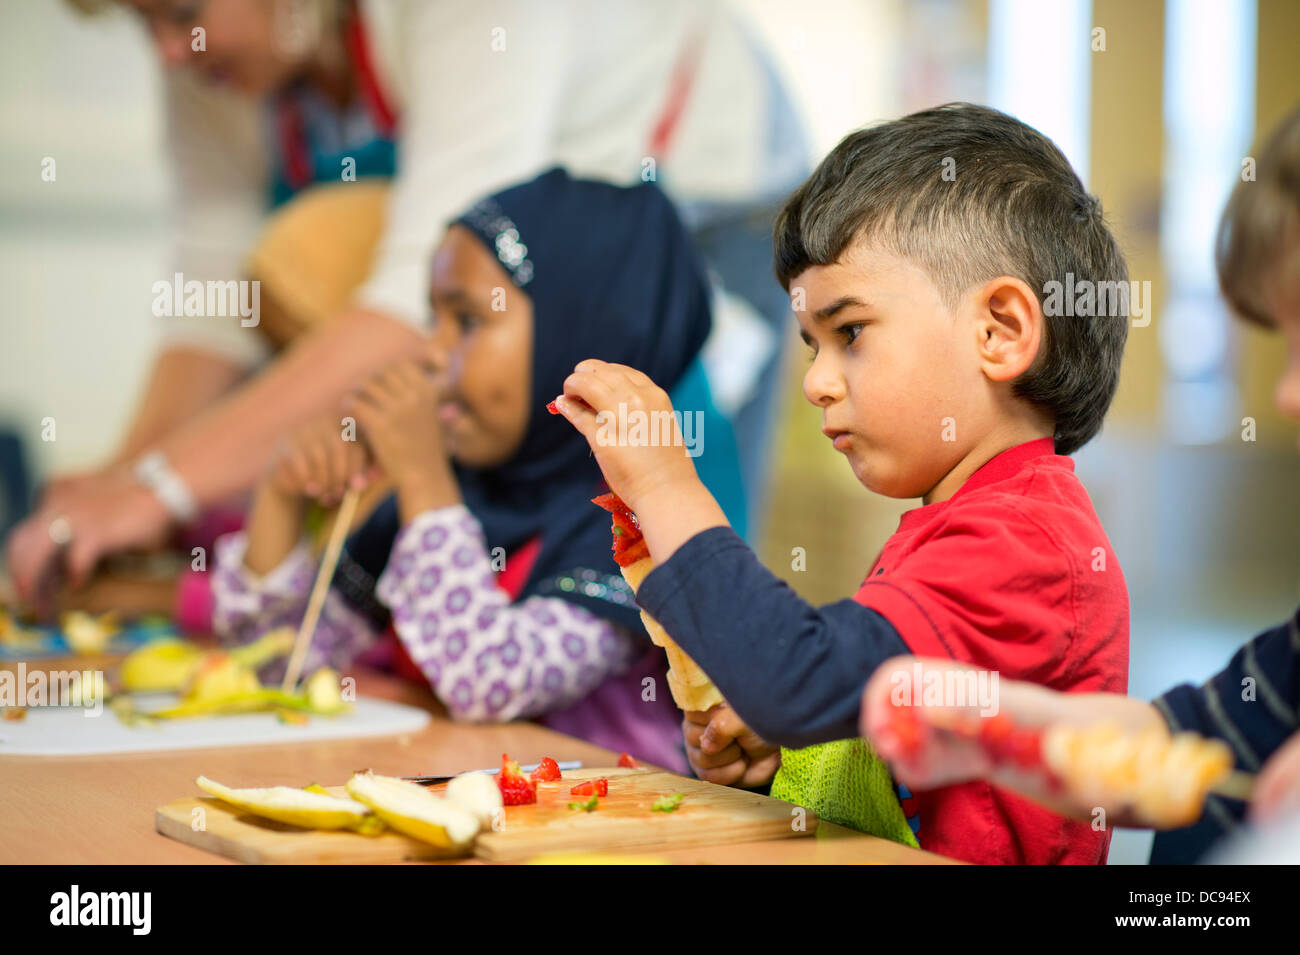 The St. Pauls Nursery School and Children's Centre, Bristol UK - A healthy food class. Stock Photo